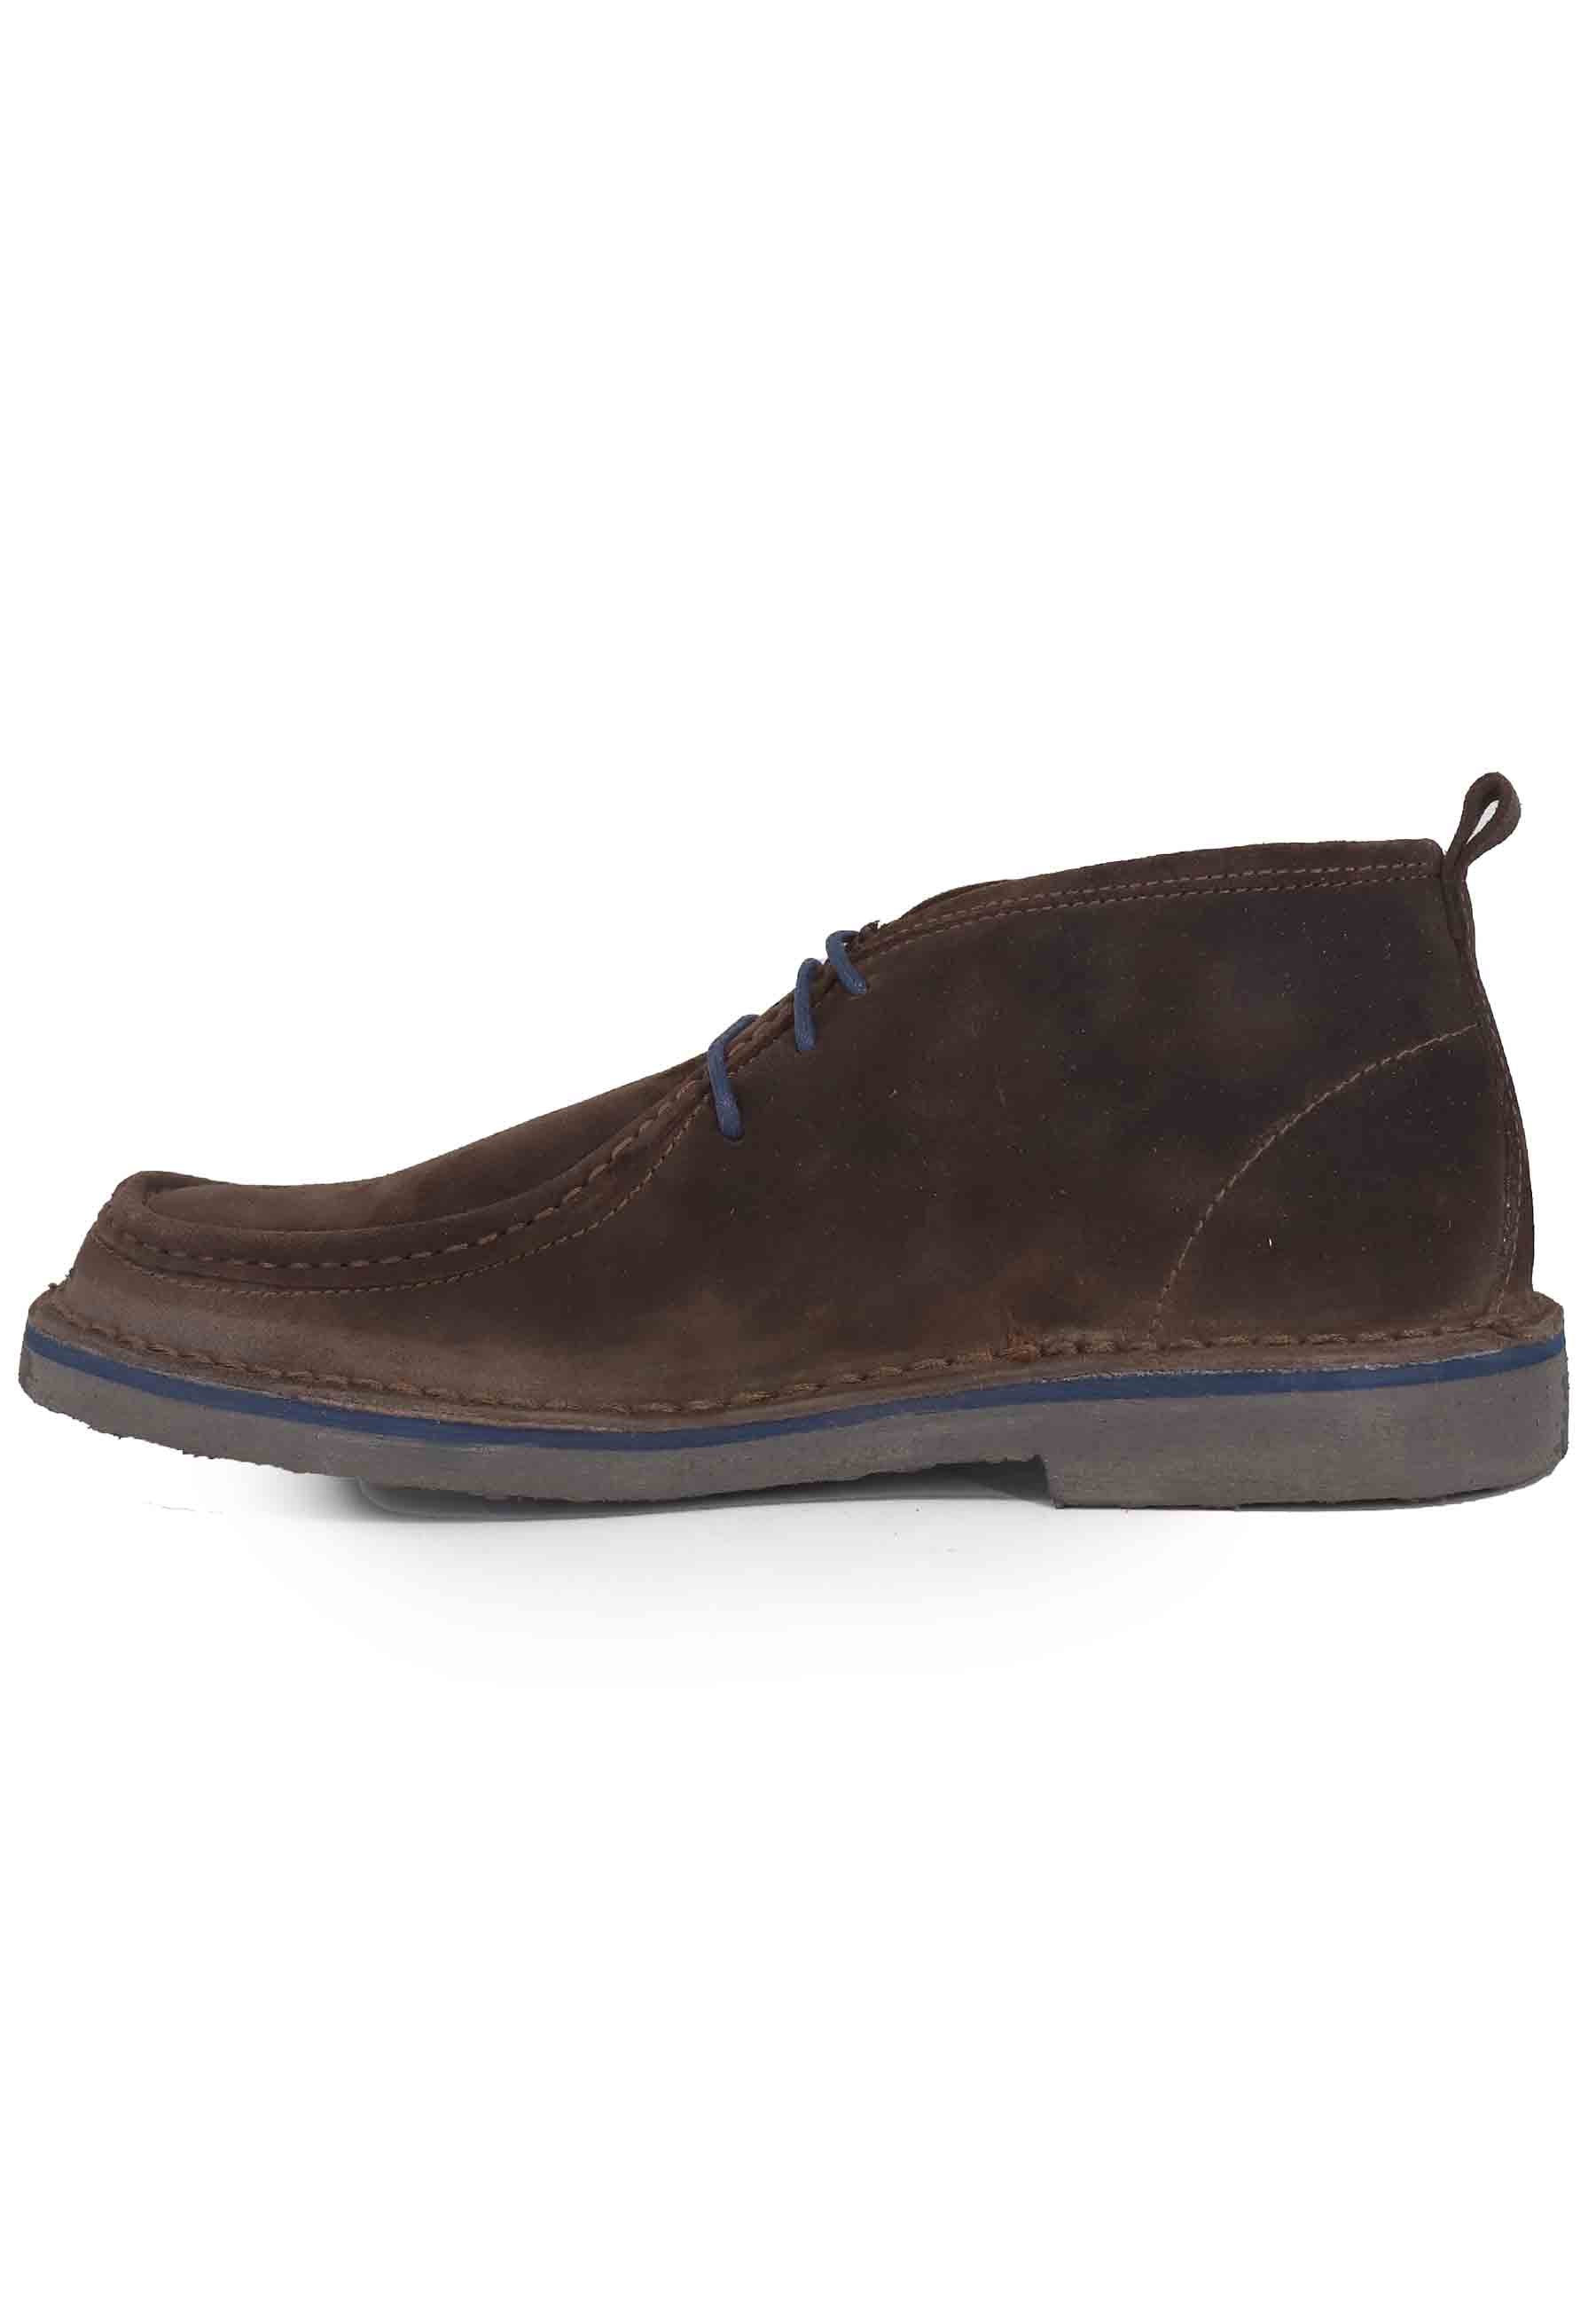 Men's lace-up ankle boots in dark brown suede with rubber sole